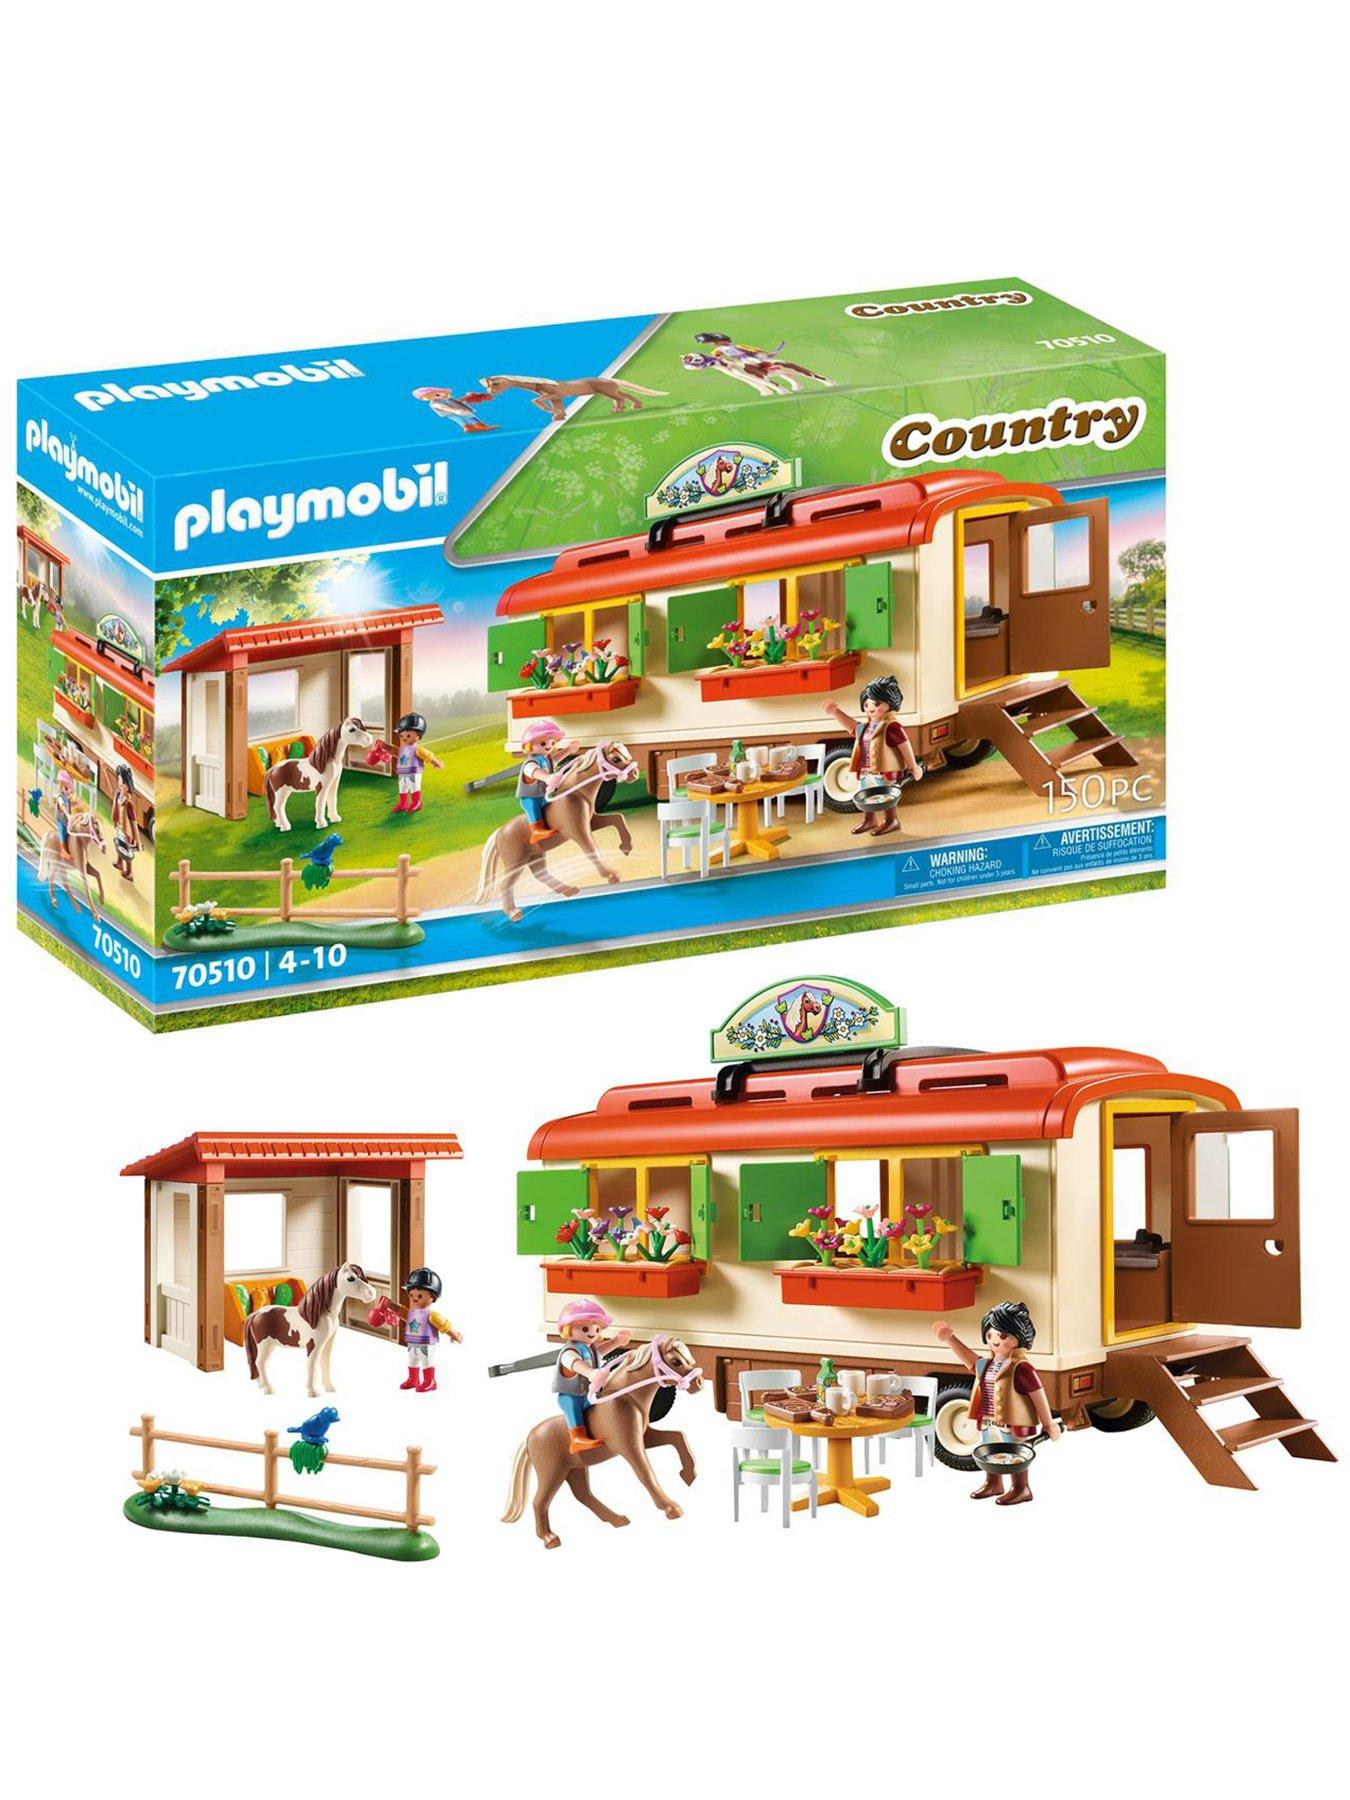 Playmobil 70510 Country Pony with Mobile Home Very Ireland